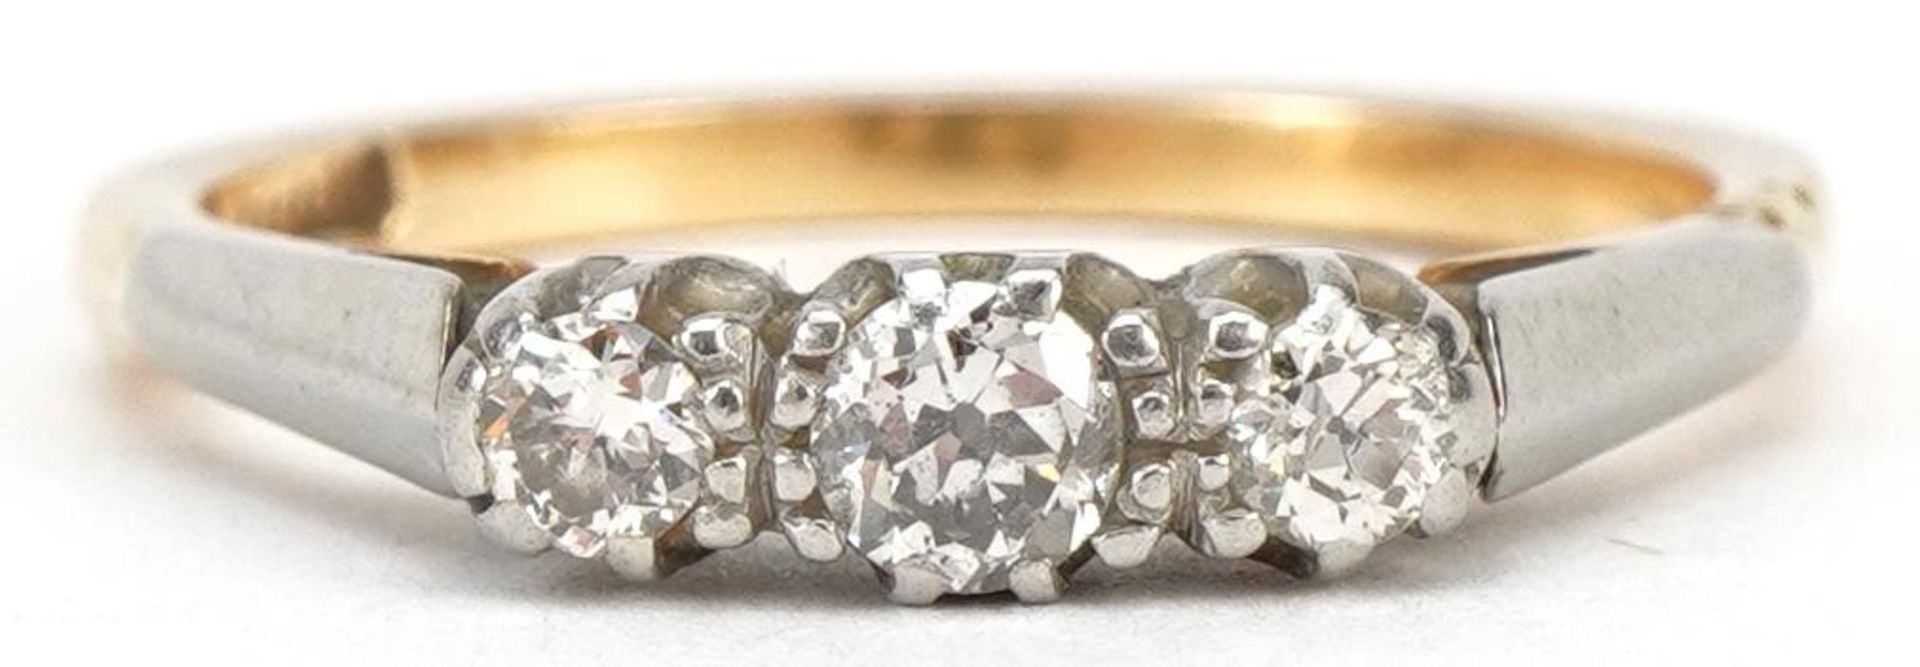 18ct gold diamond three stone ring, the largest diamond approximately 3.0mm in diameter, size M, 2.